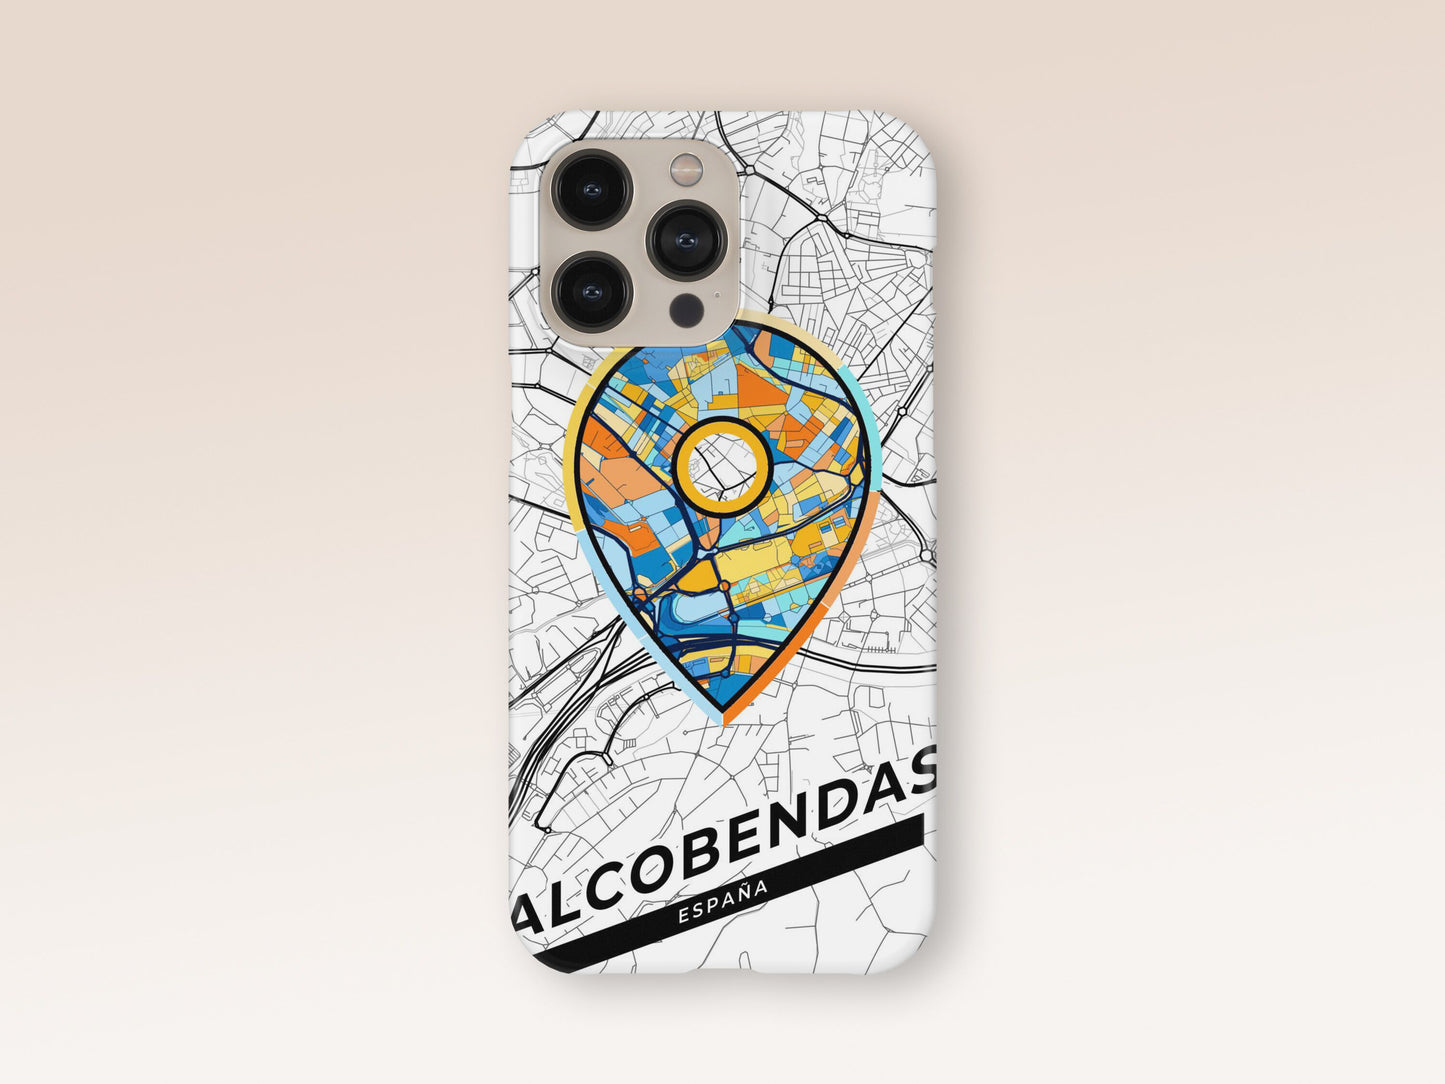 Alcobendas Spain slim phone case with colorful icon. Birthday, wedding or housewarming gift. Couple match cases. 1